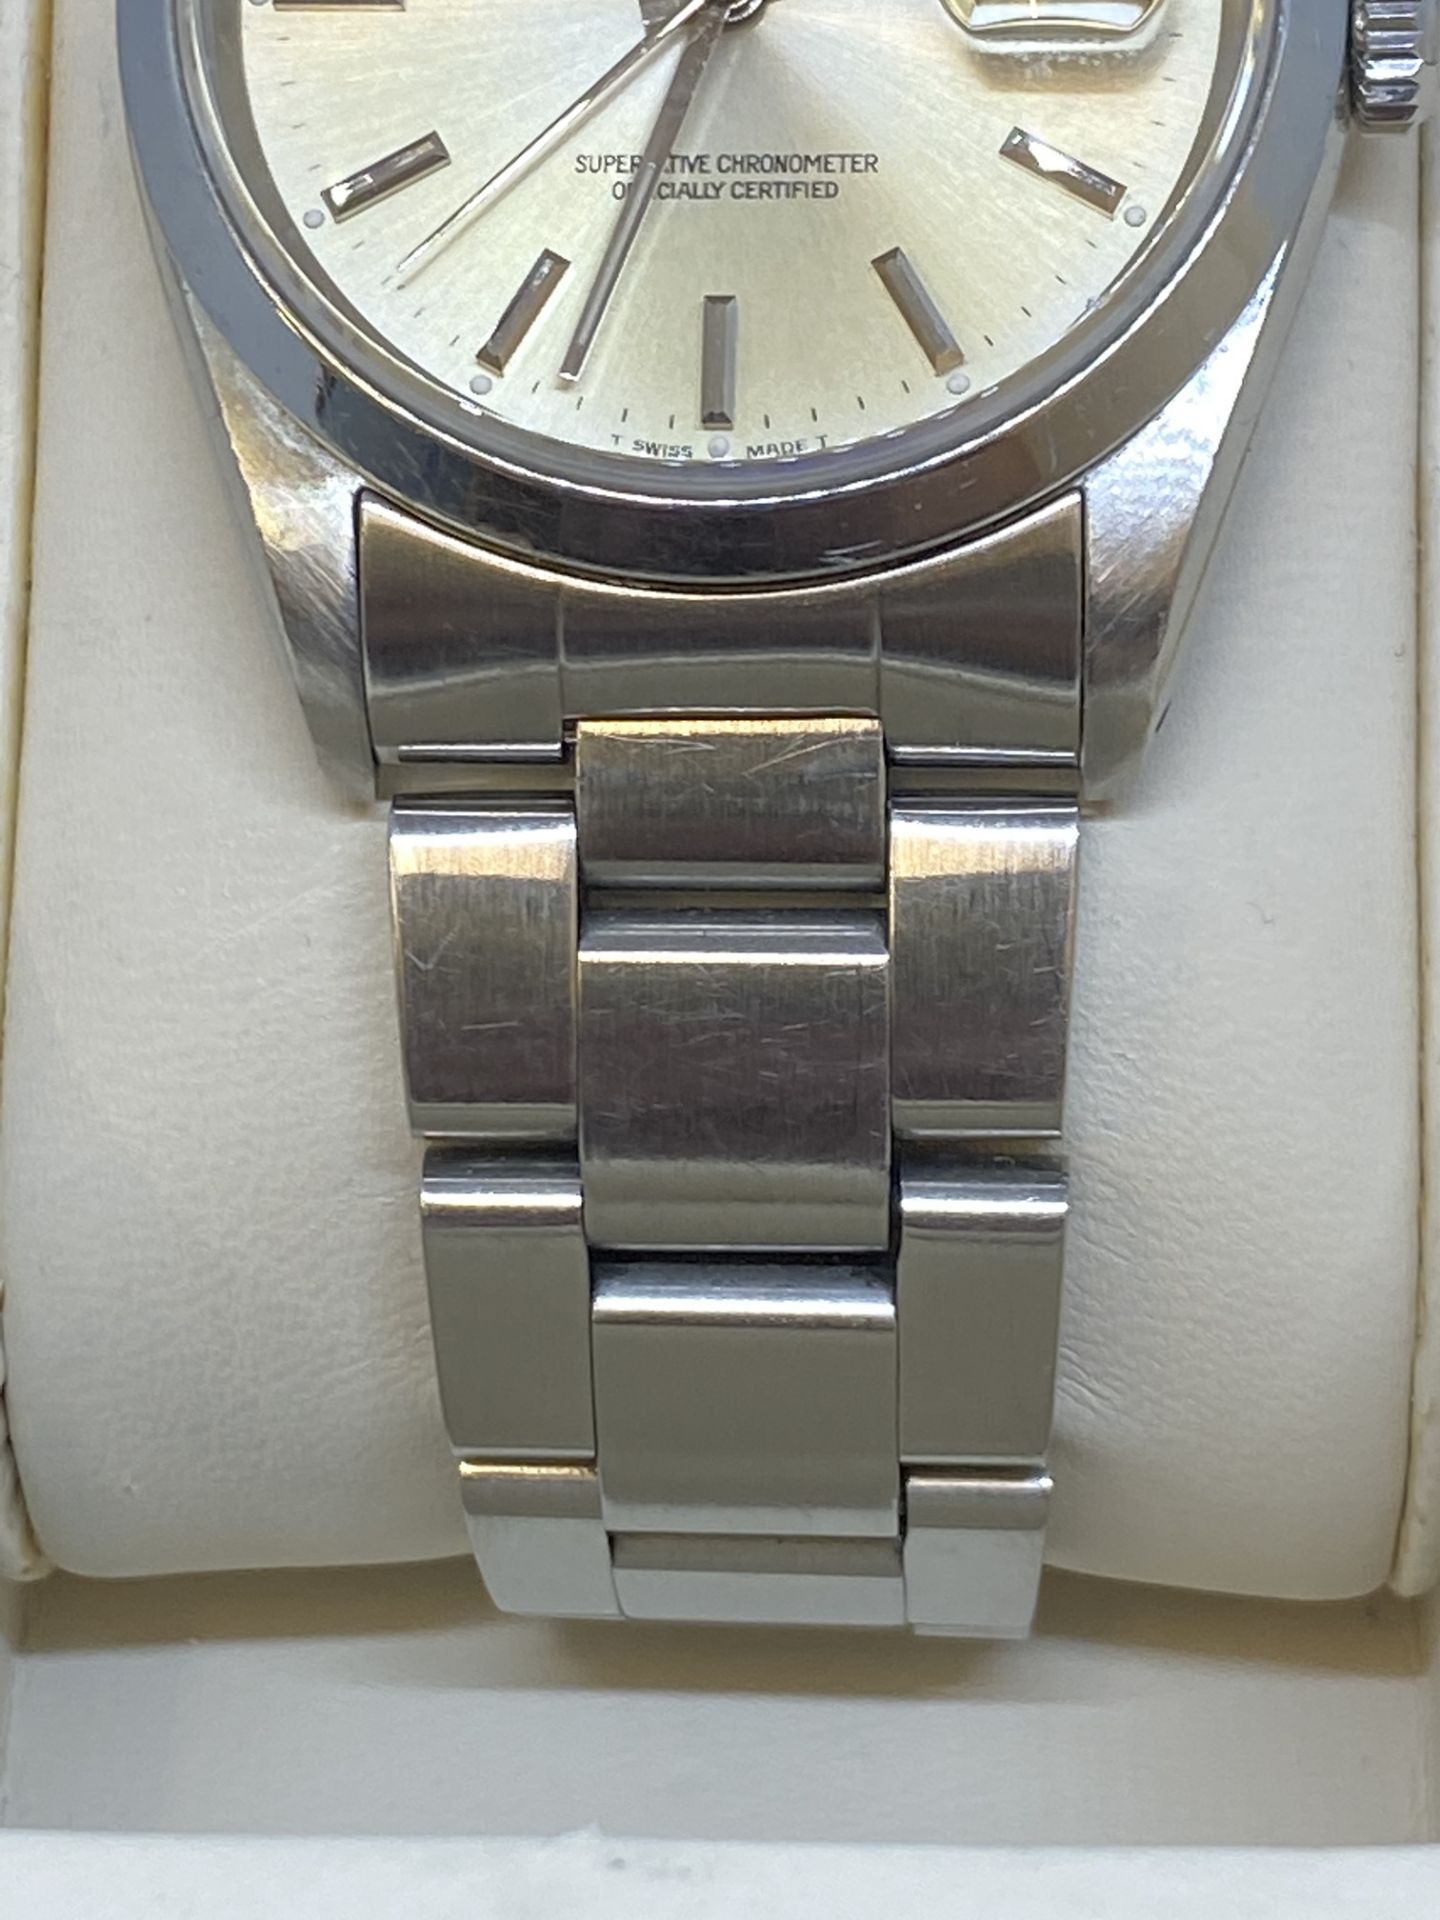 ROLEX STAINLESS STEEL WATCH - Image 7 of 8